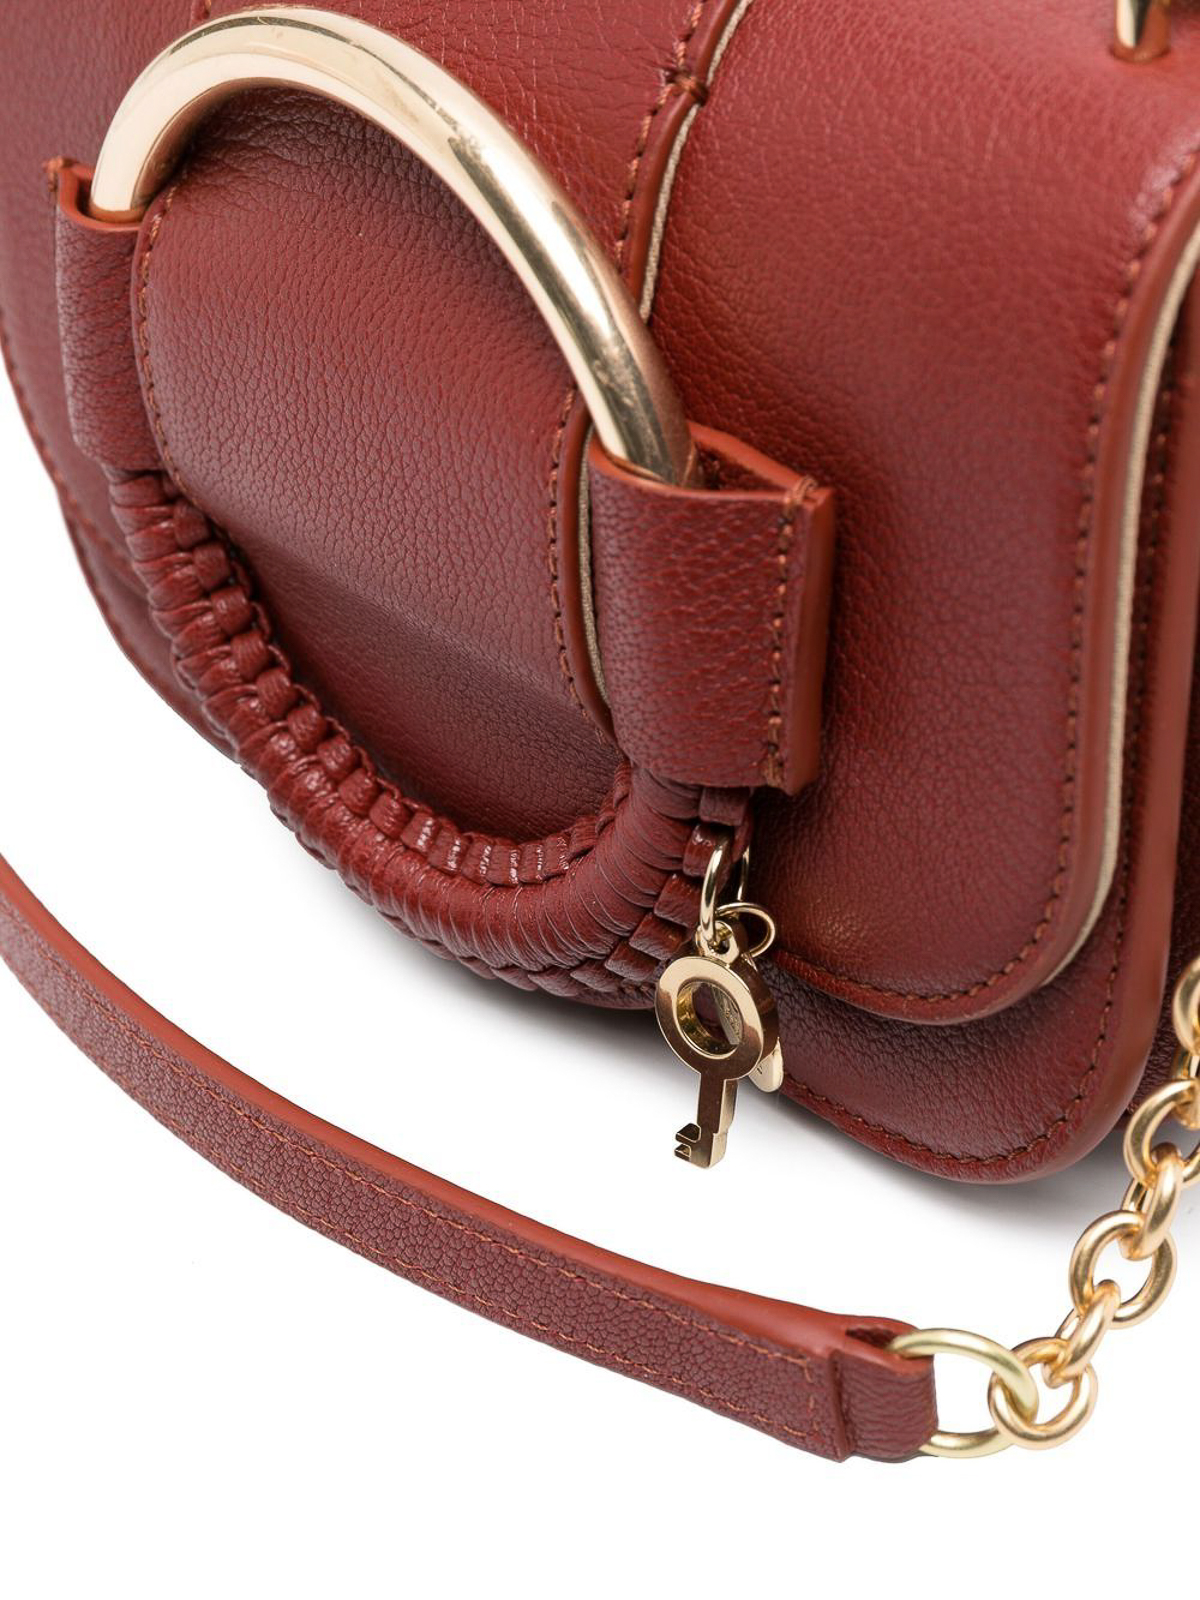 Soda Pop Upcycled Ring Pull Bag By Smart Deco Style | notonthehighstreet.com